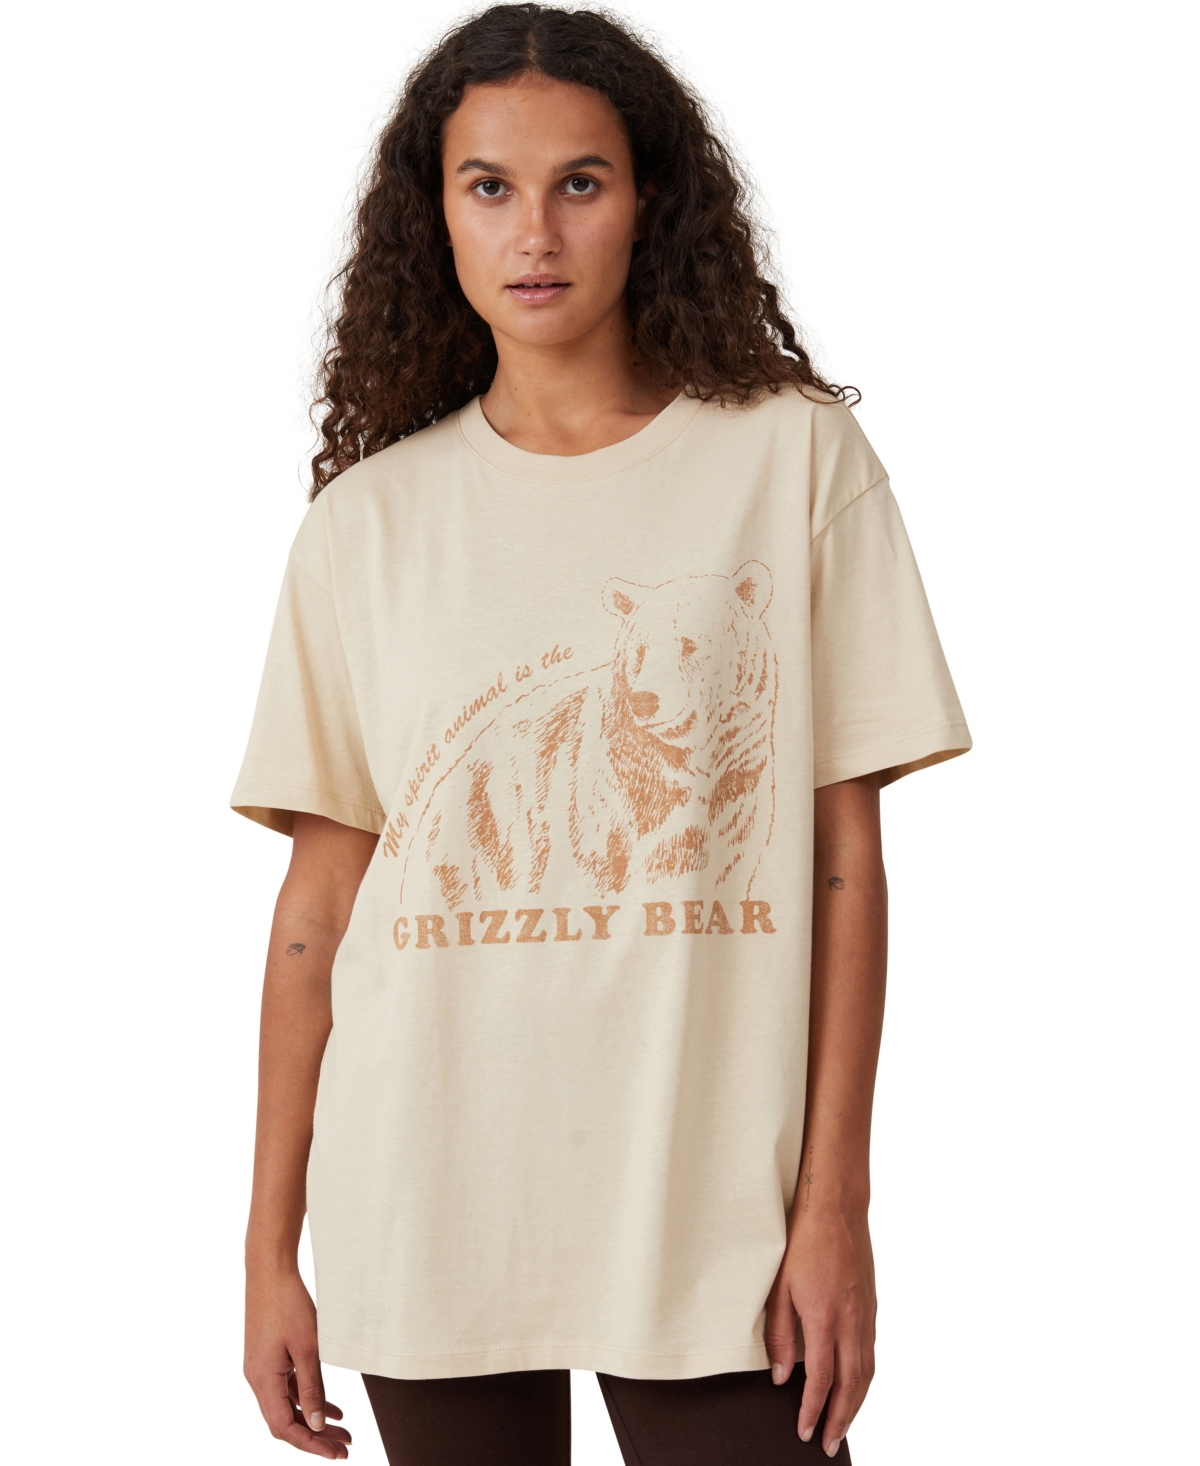 Cotton On Women's The Oversized Graphic T-shirt In Grizzly Bear,shortbread